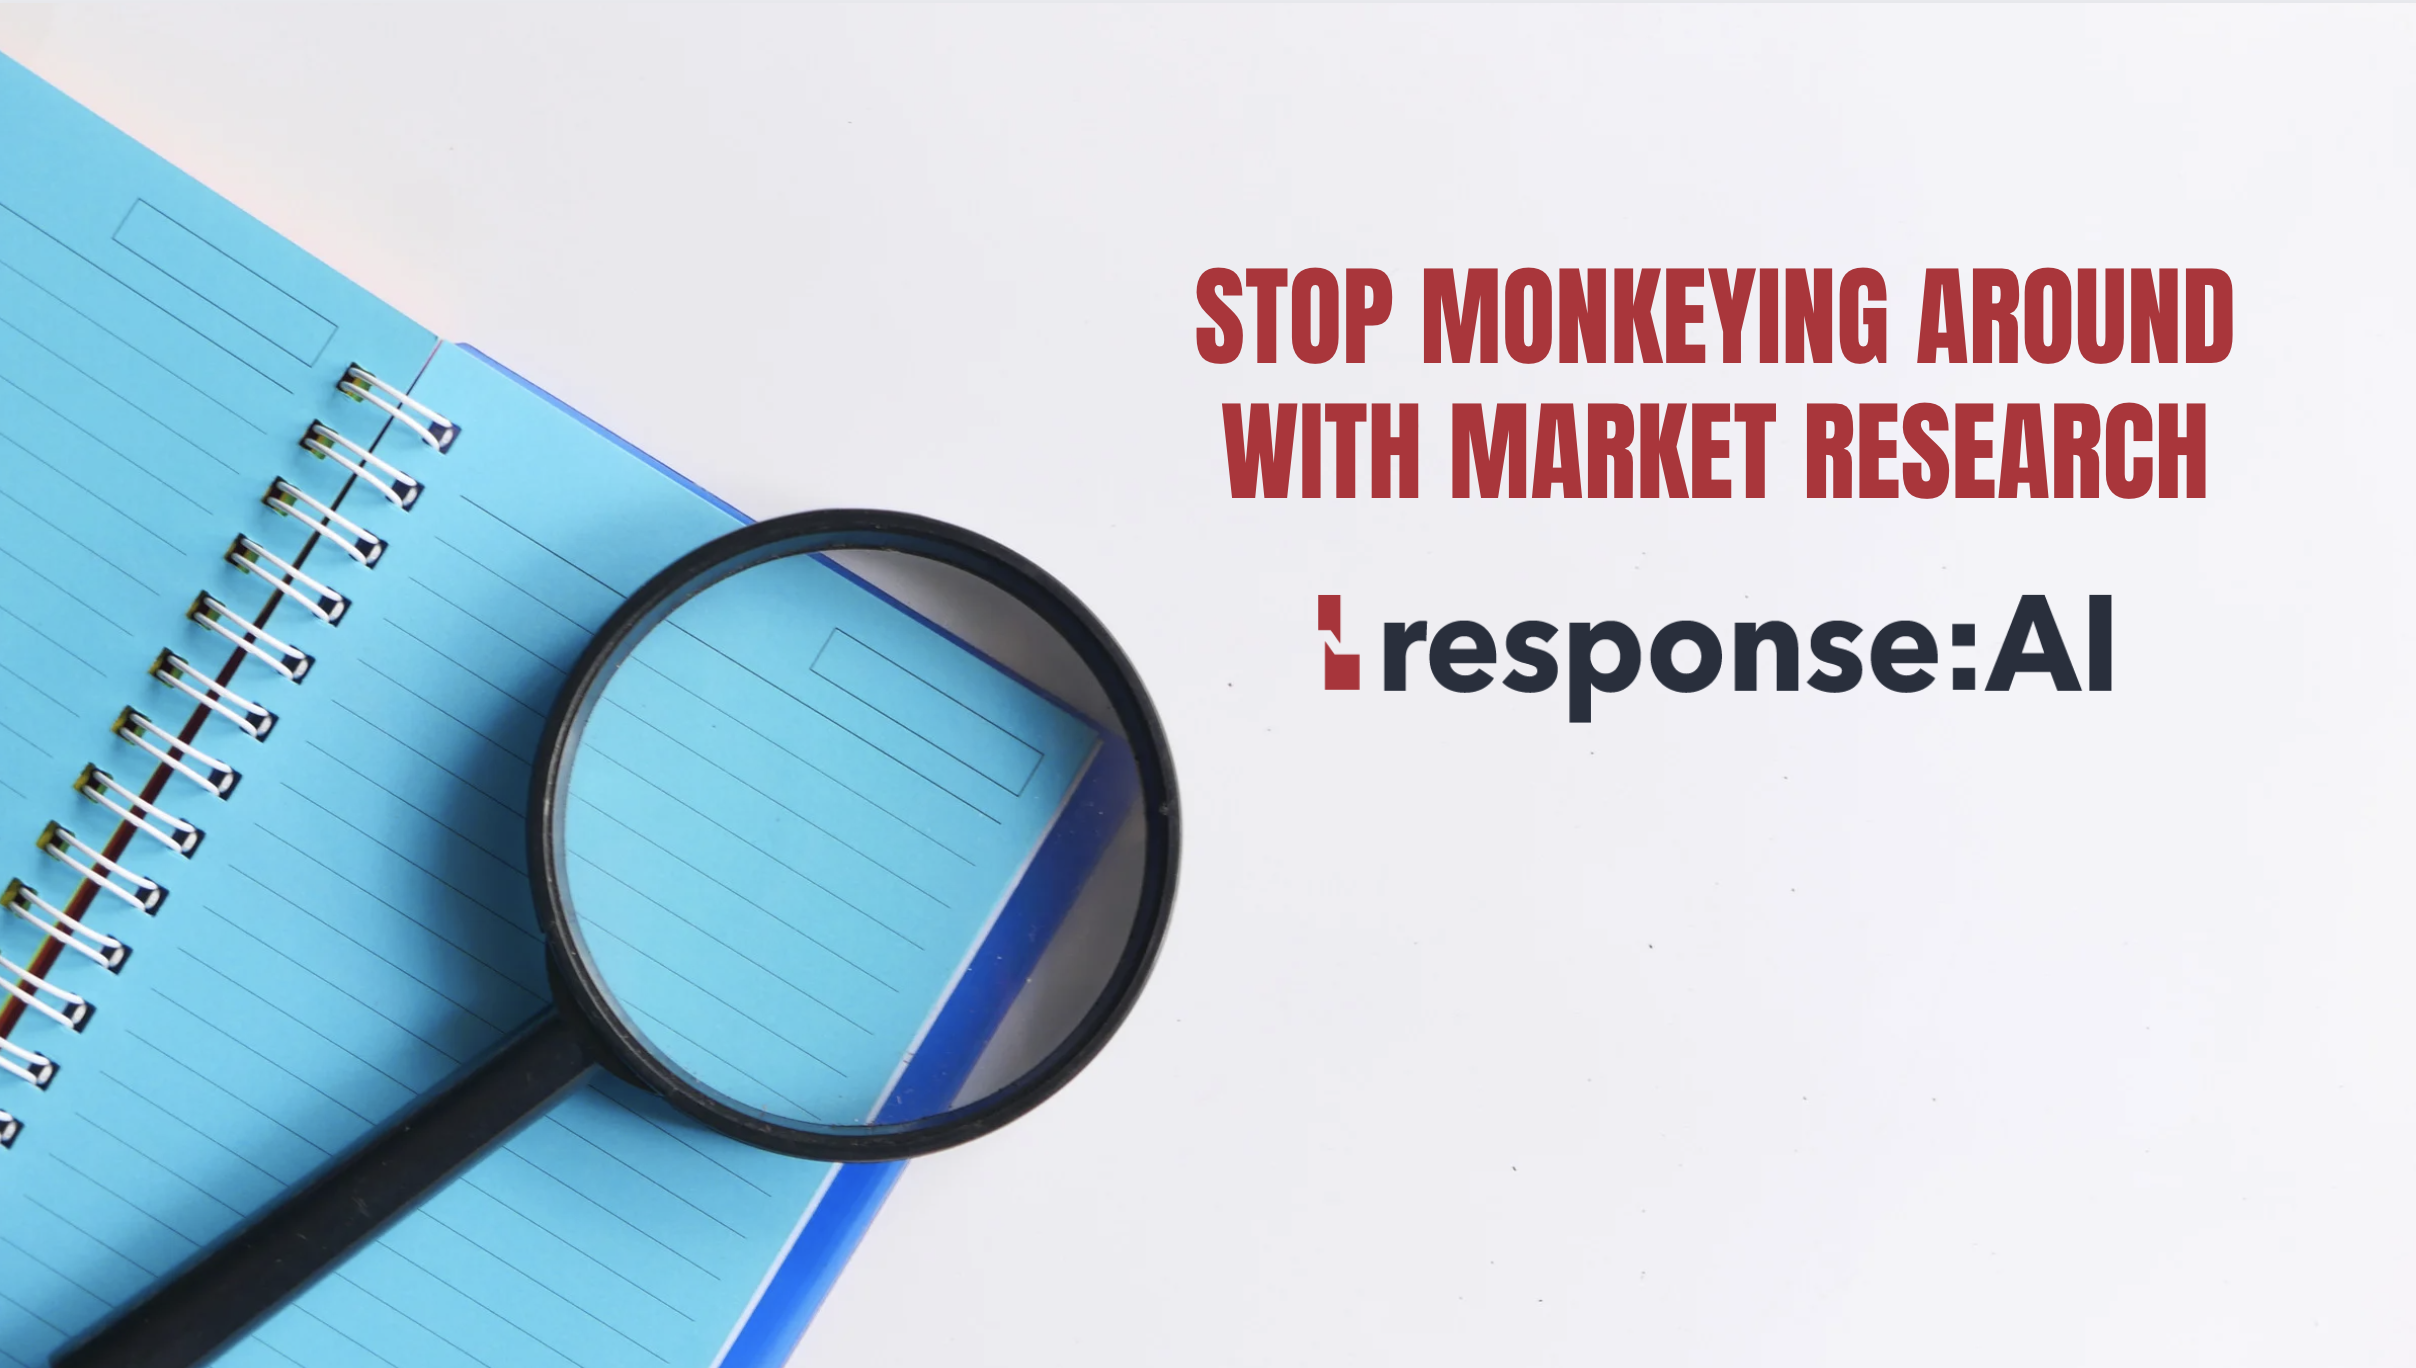 STOP MONKEYING AROUND WITH MARKET RESEARCH